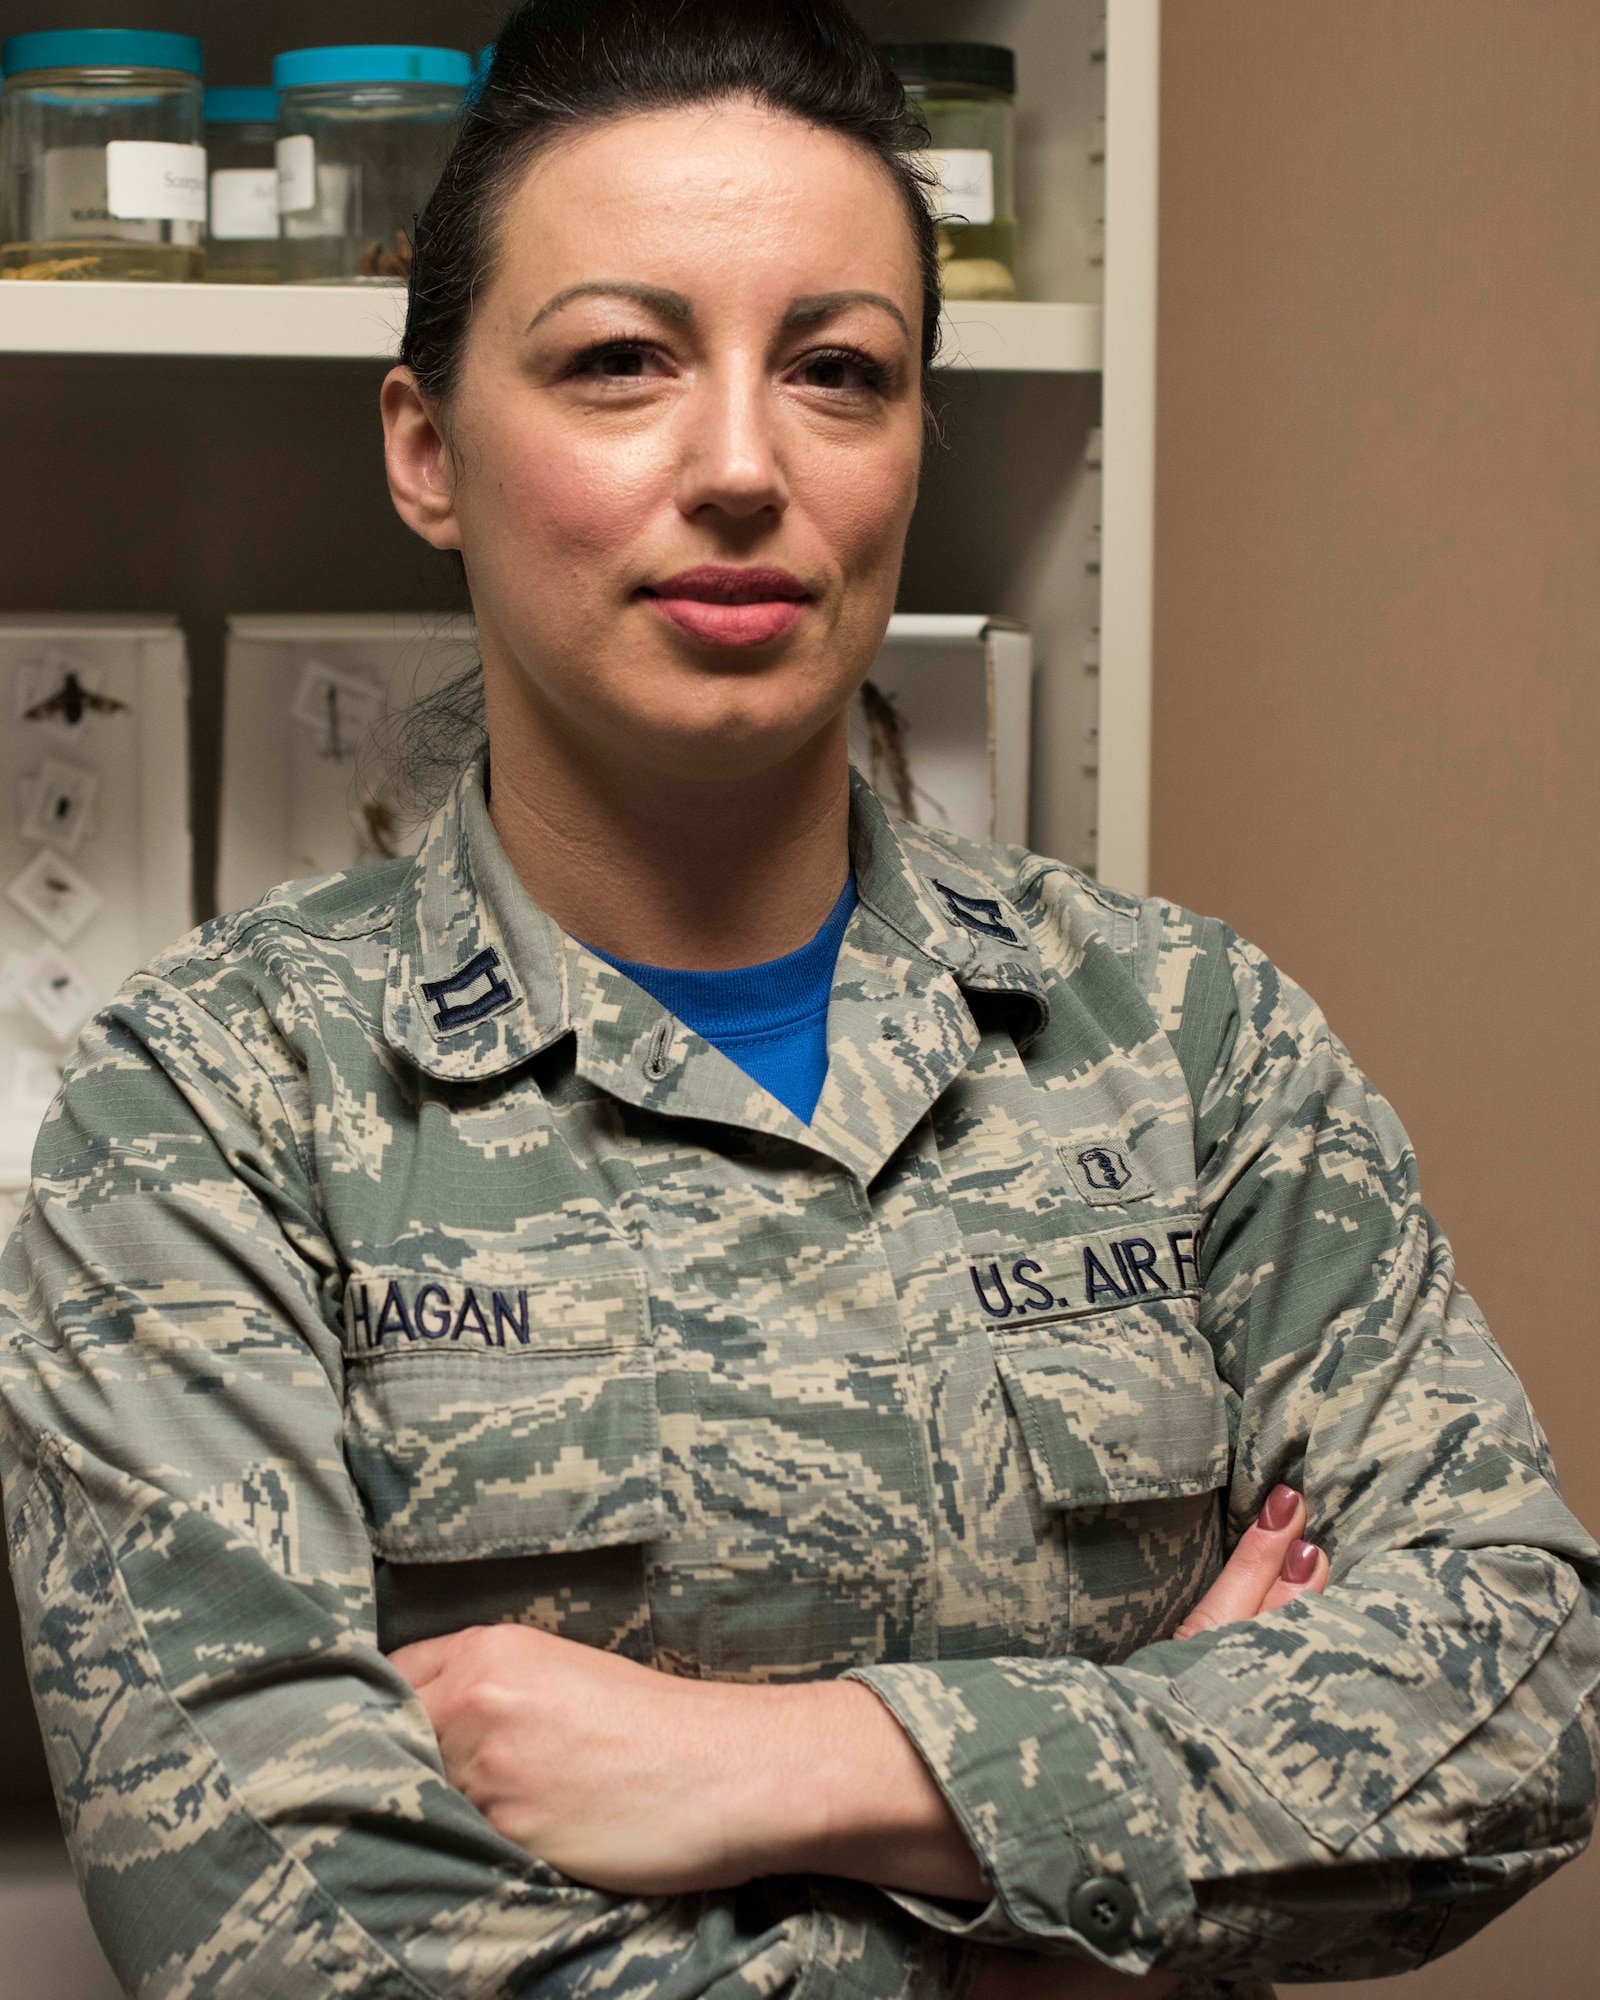 Capt. Sarah Hagan, 49th Medical Group Public Health flight commander, poses in the Public Health clinic, Jan. 11, 2019, on Holloman Air Force Base, N.M. The public health flight oversees 18 programs across the 49th Wing, and their primary missions are disease prevention and deployment readiness. (U.S. Air Force photo by Staff Sgt. BreeAnn Sachs)